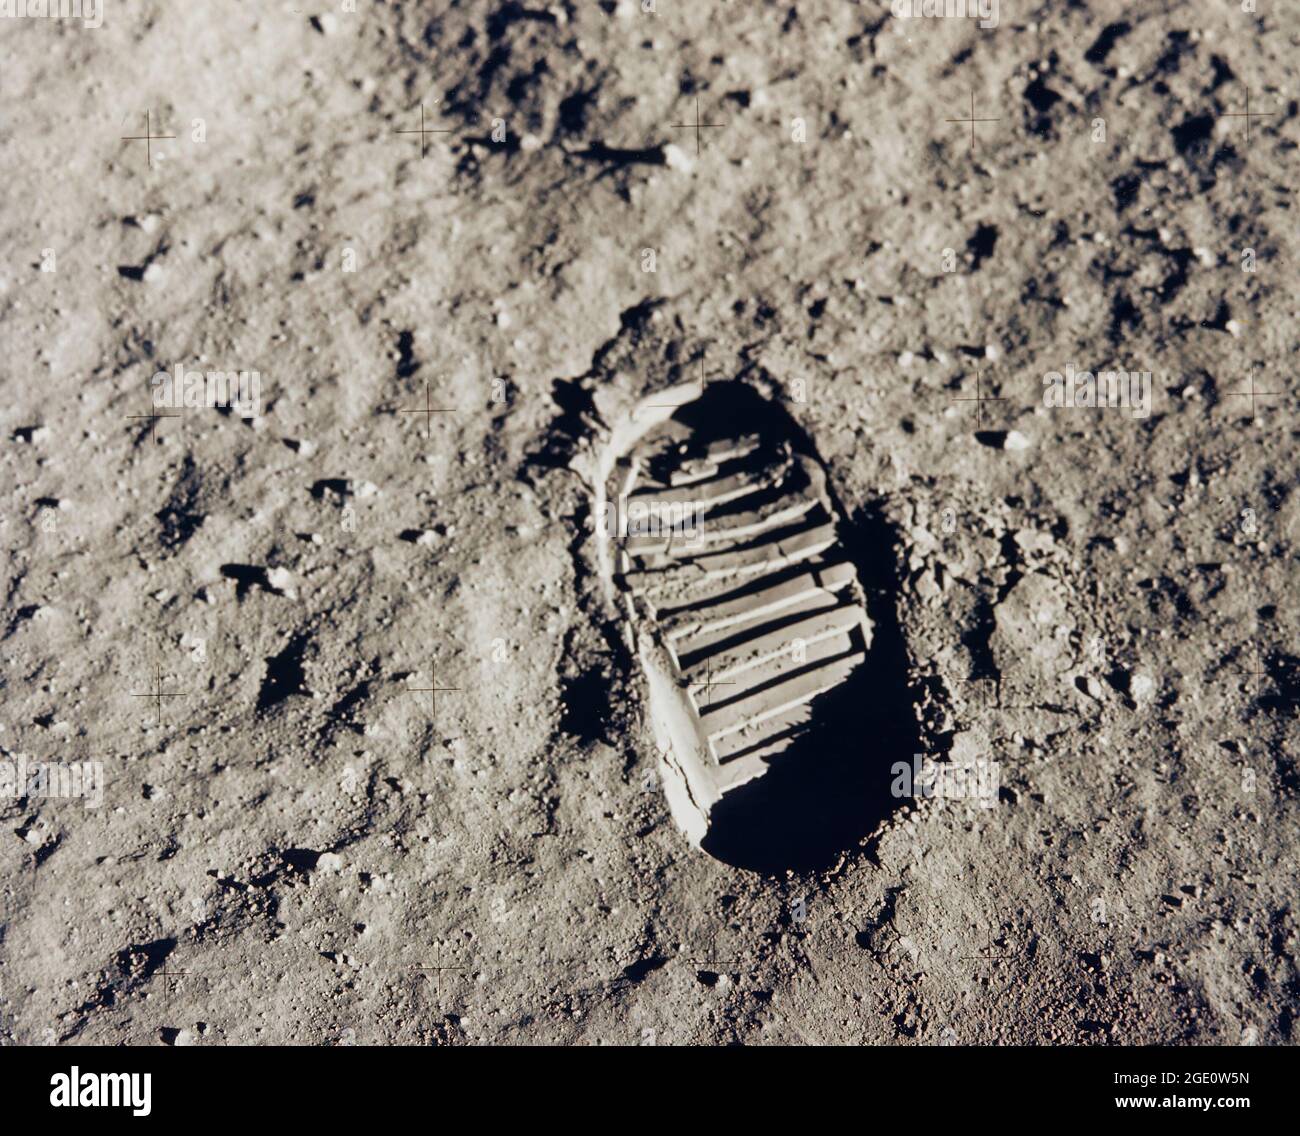 Apollo 11 Bootprint One of the first steps taken on the Moon, this is an image of Buzz Aldrin's bootprint from the Apollo 11 mission. Neil Armstrong and Buzz Aldrin walked on the Moon on July 20, 1969. Stock Photo